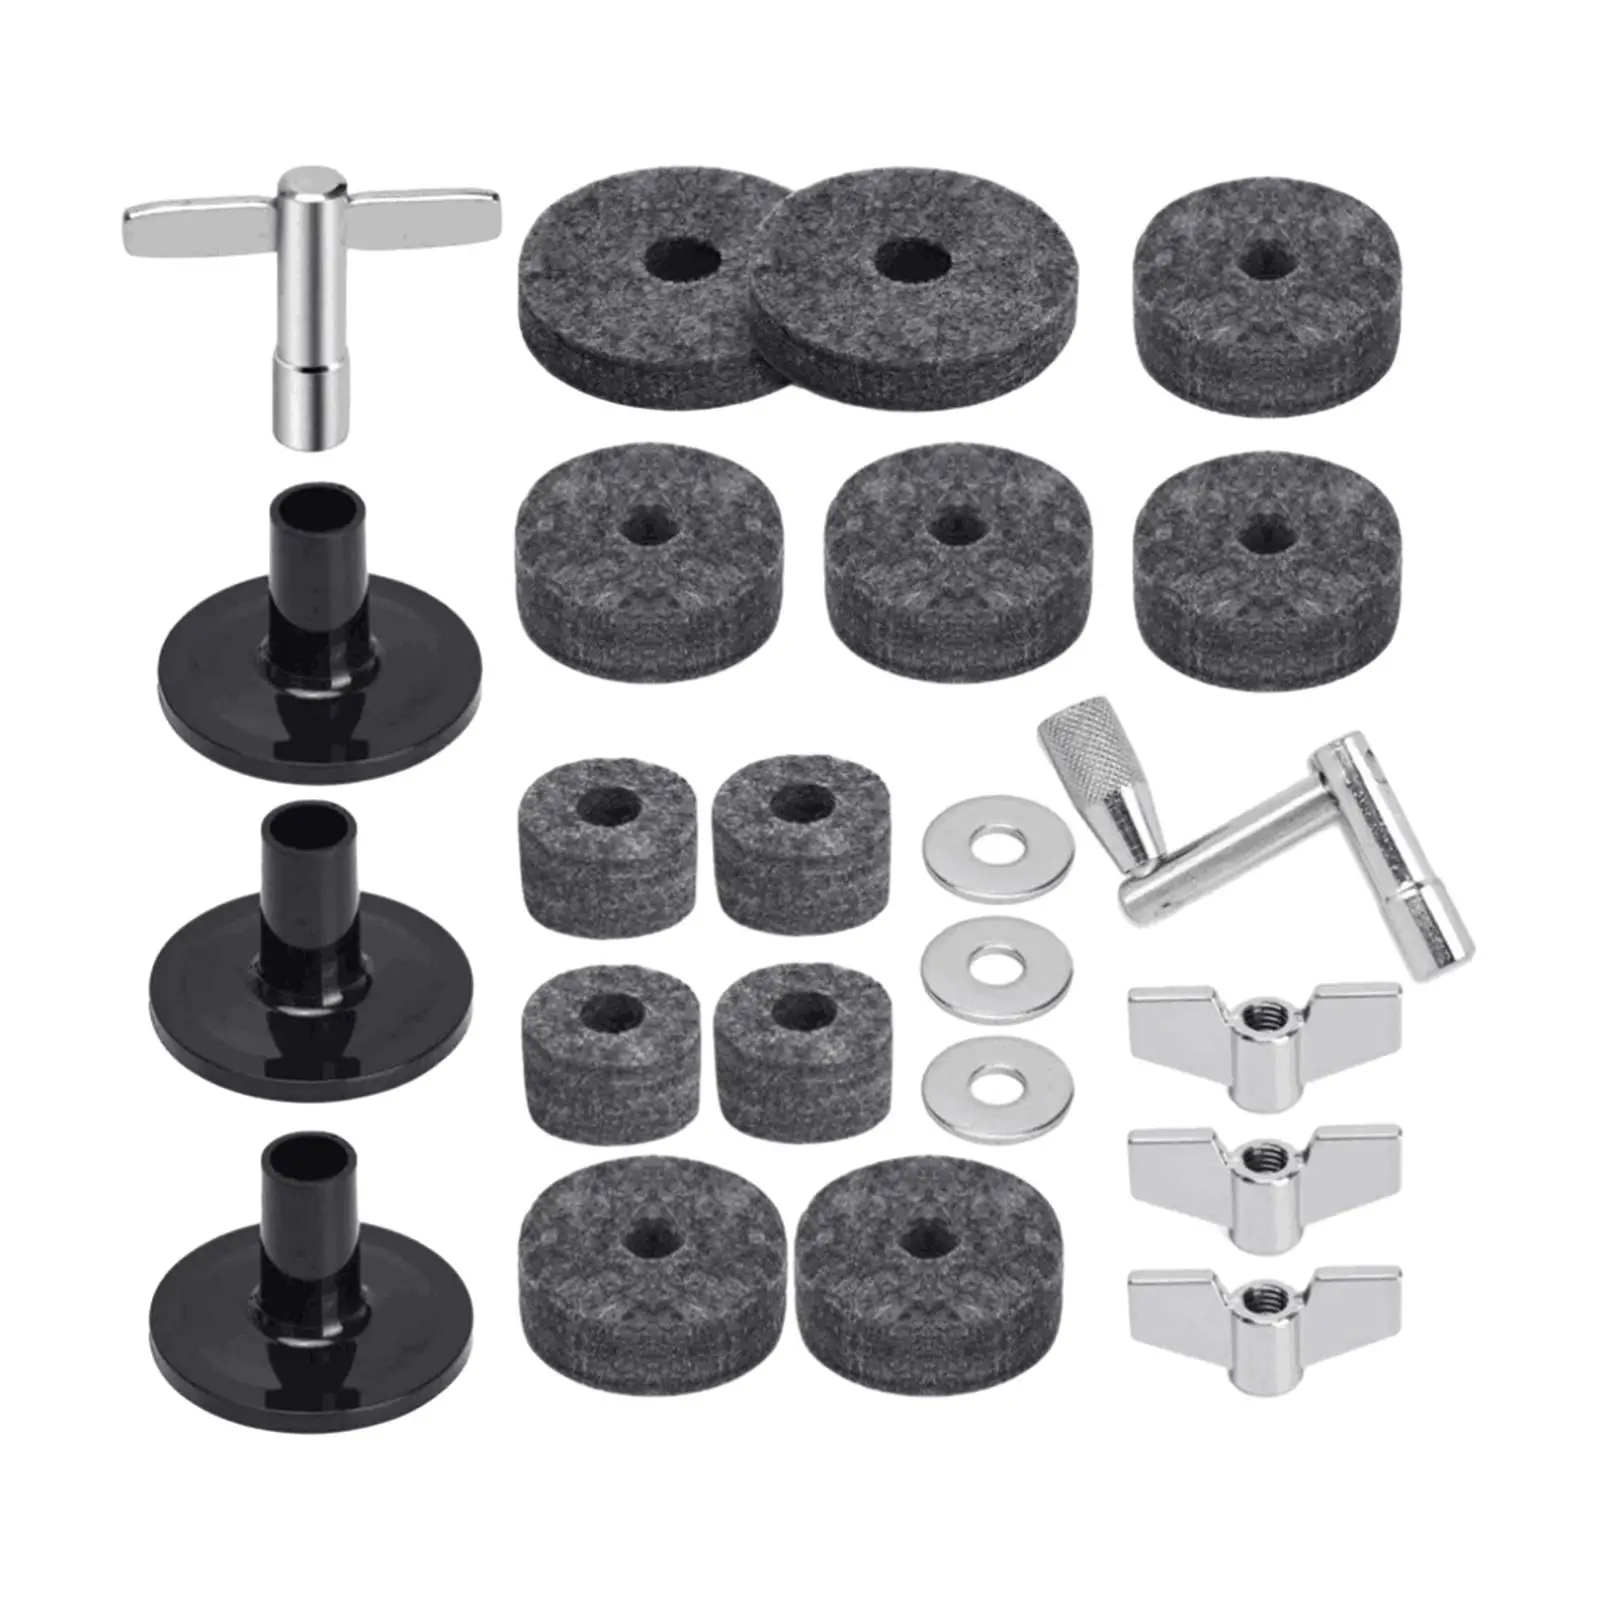 23Pcs Cymbal Stand Felts Cymbal Replacement Accessory for Shelf Drum Kits